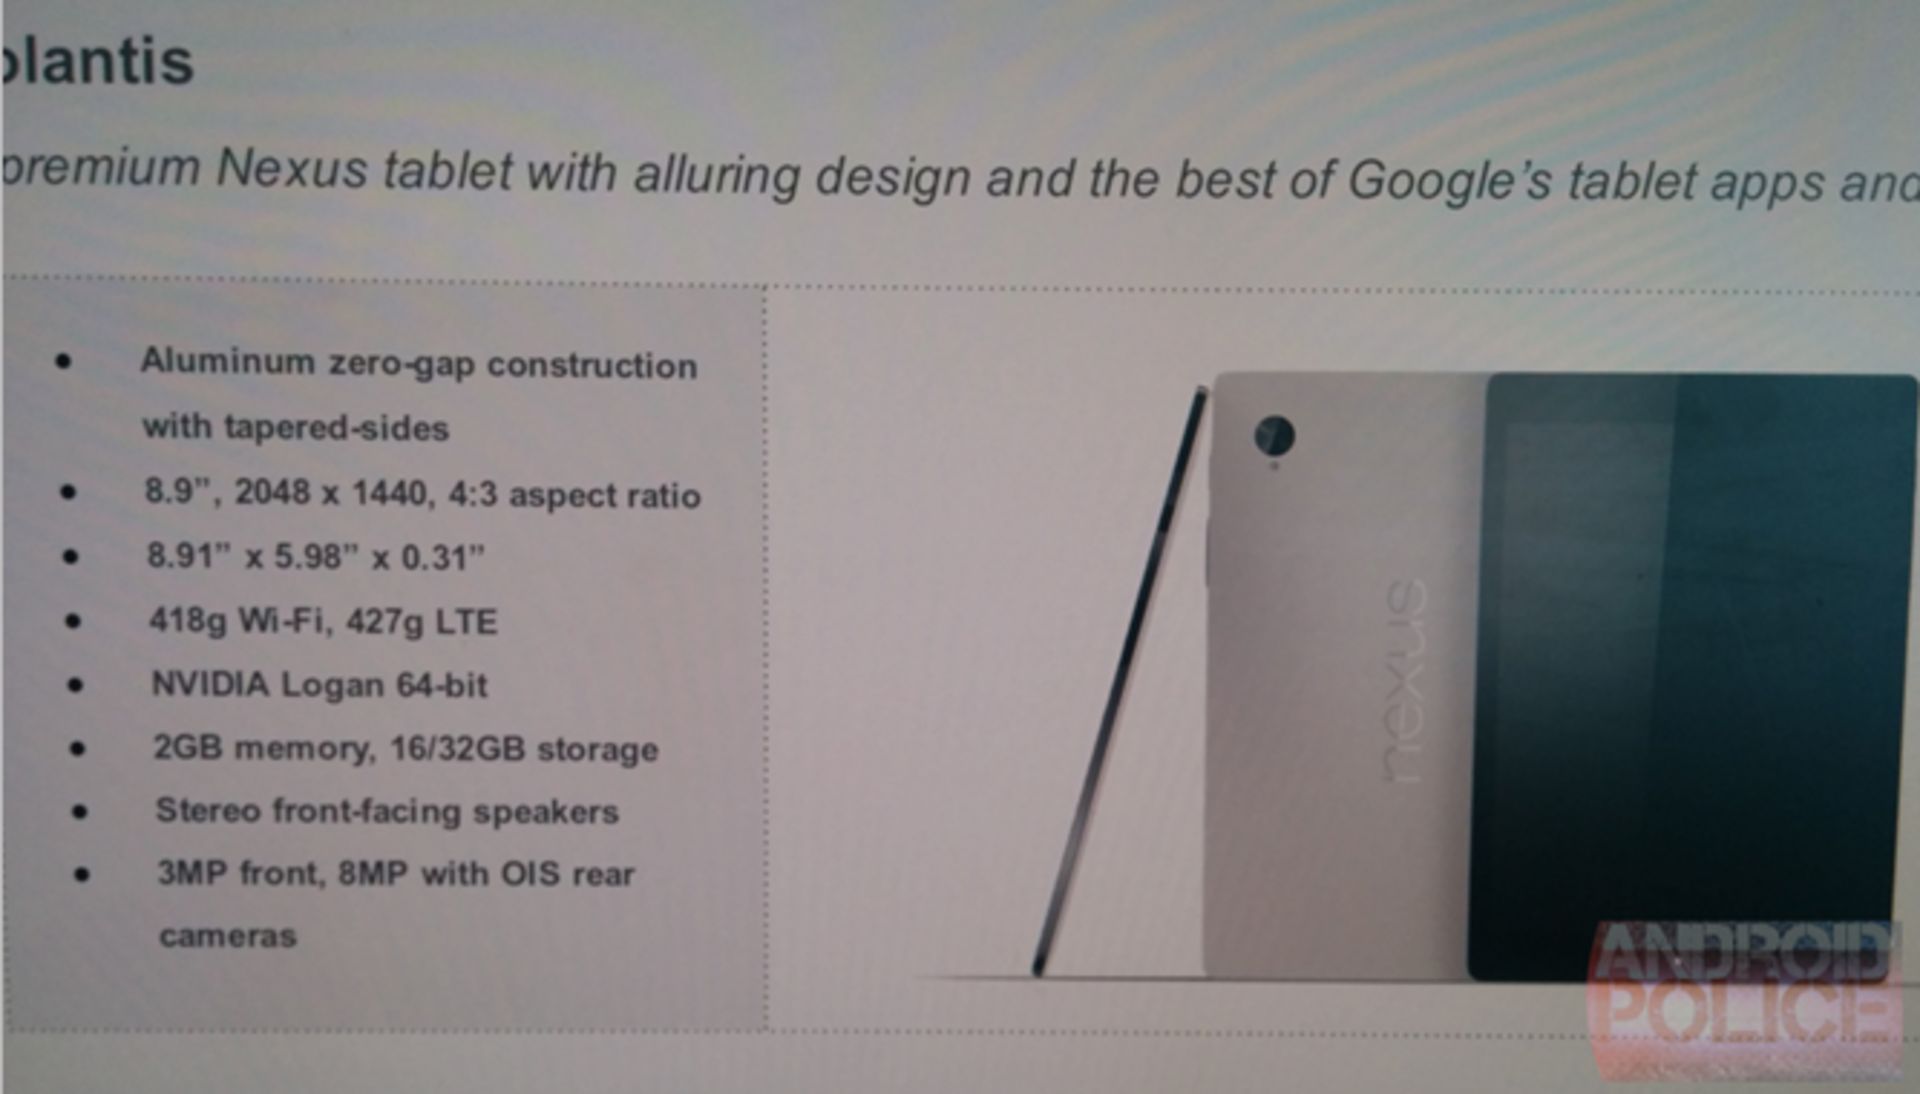 Picture-and-specs-of-the-rumored-8.9-inch-HTC-Nexus-tablet.jpg2